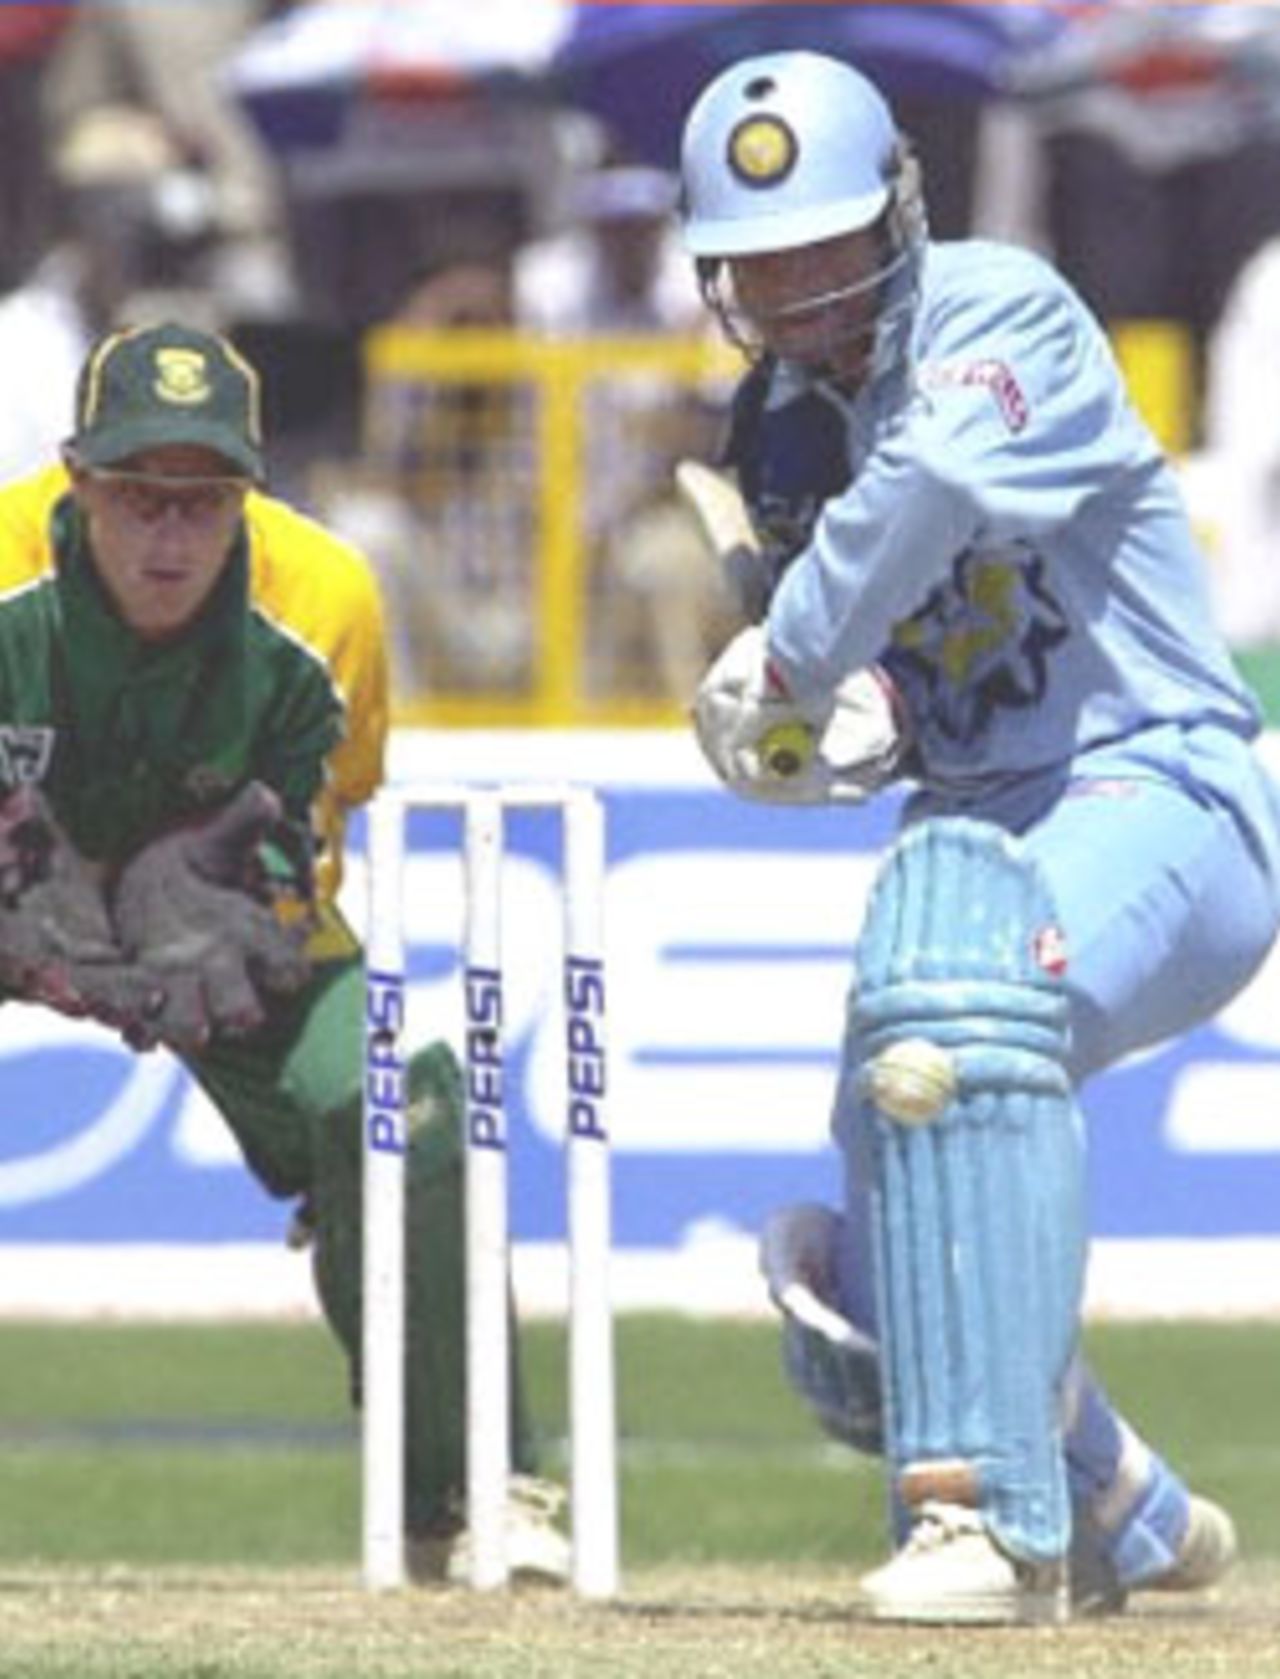 Indian batsman Rahul Dravid on his way to 73 runs during the one-day cricket international between India and South Africa 15 March 2000. South Africa are chasing India's challenging 248. With the gloves at ready is South African wicket keeper  Mark Boucher (L).